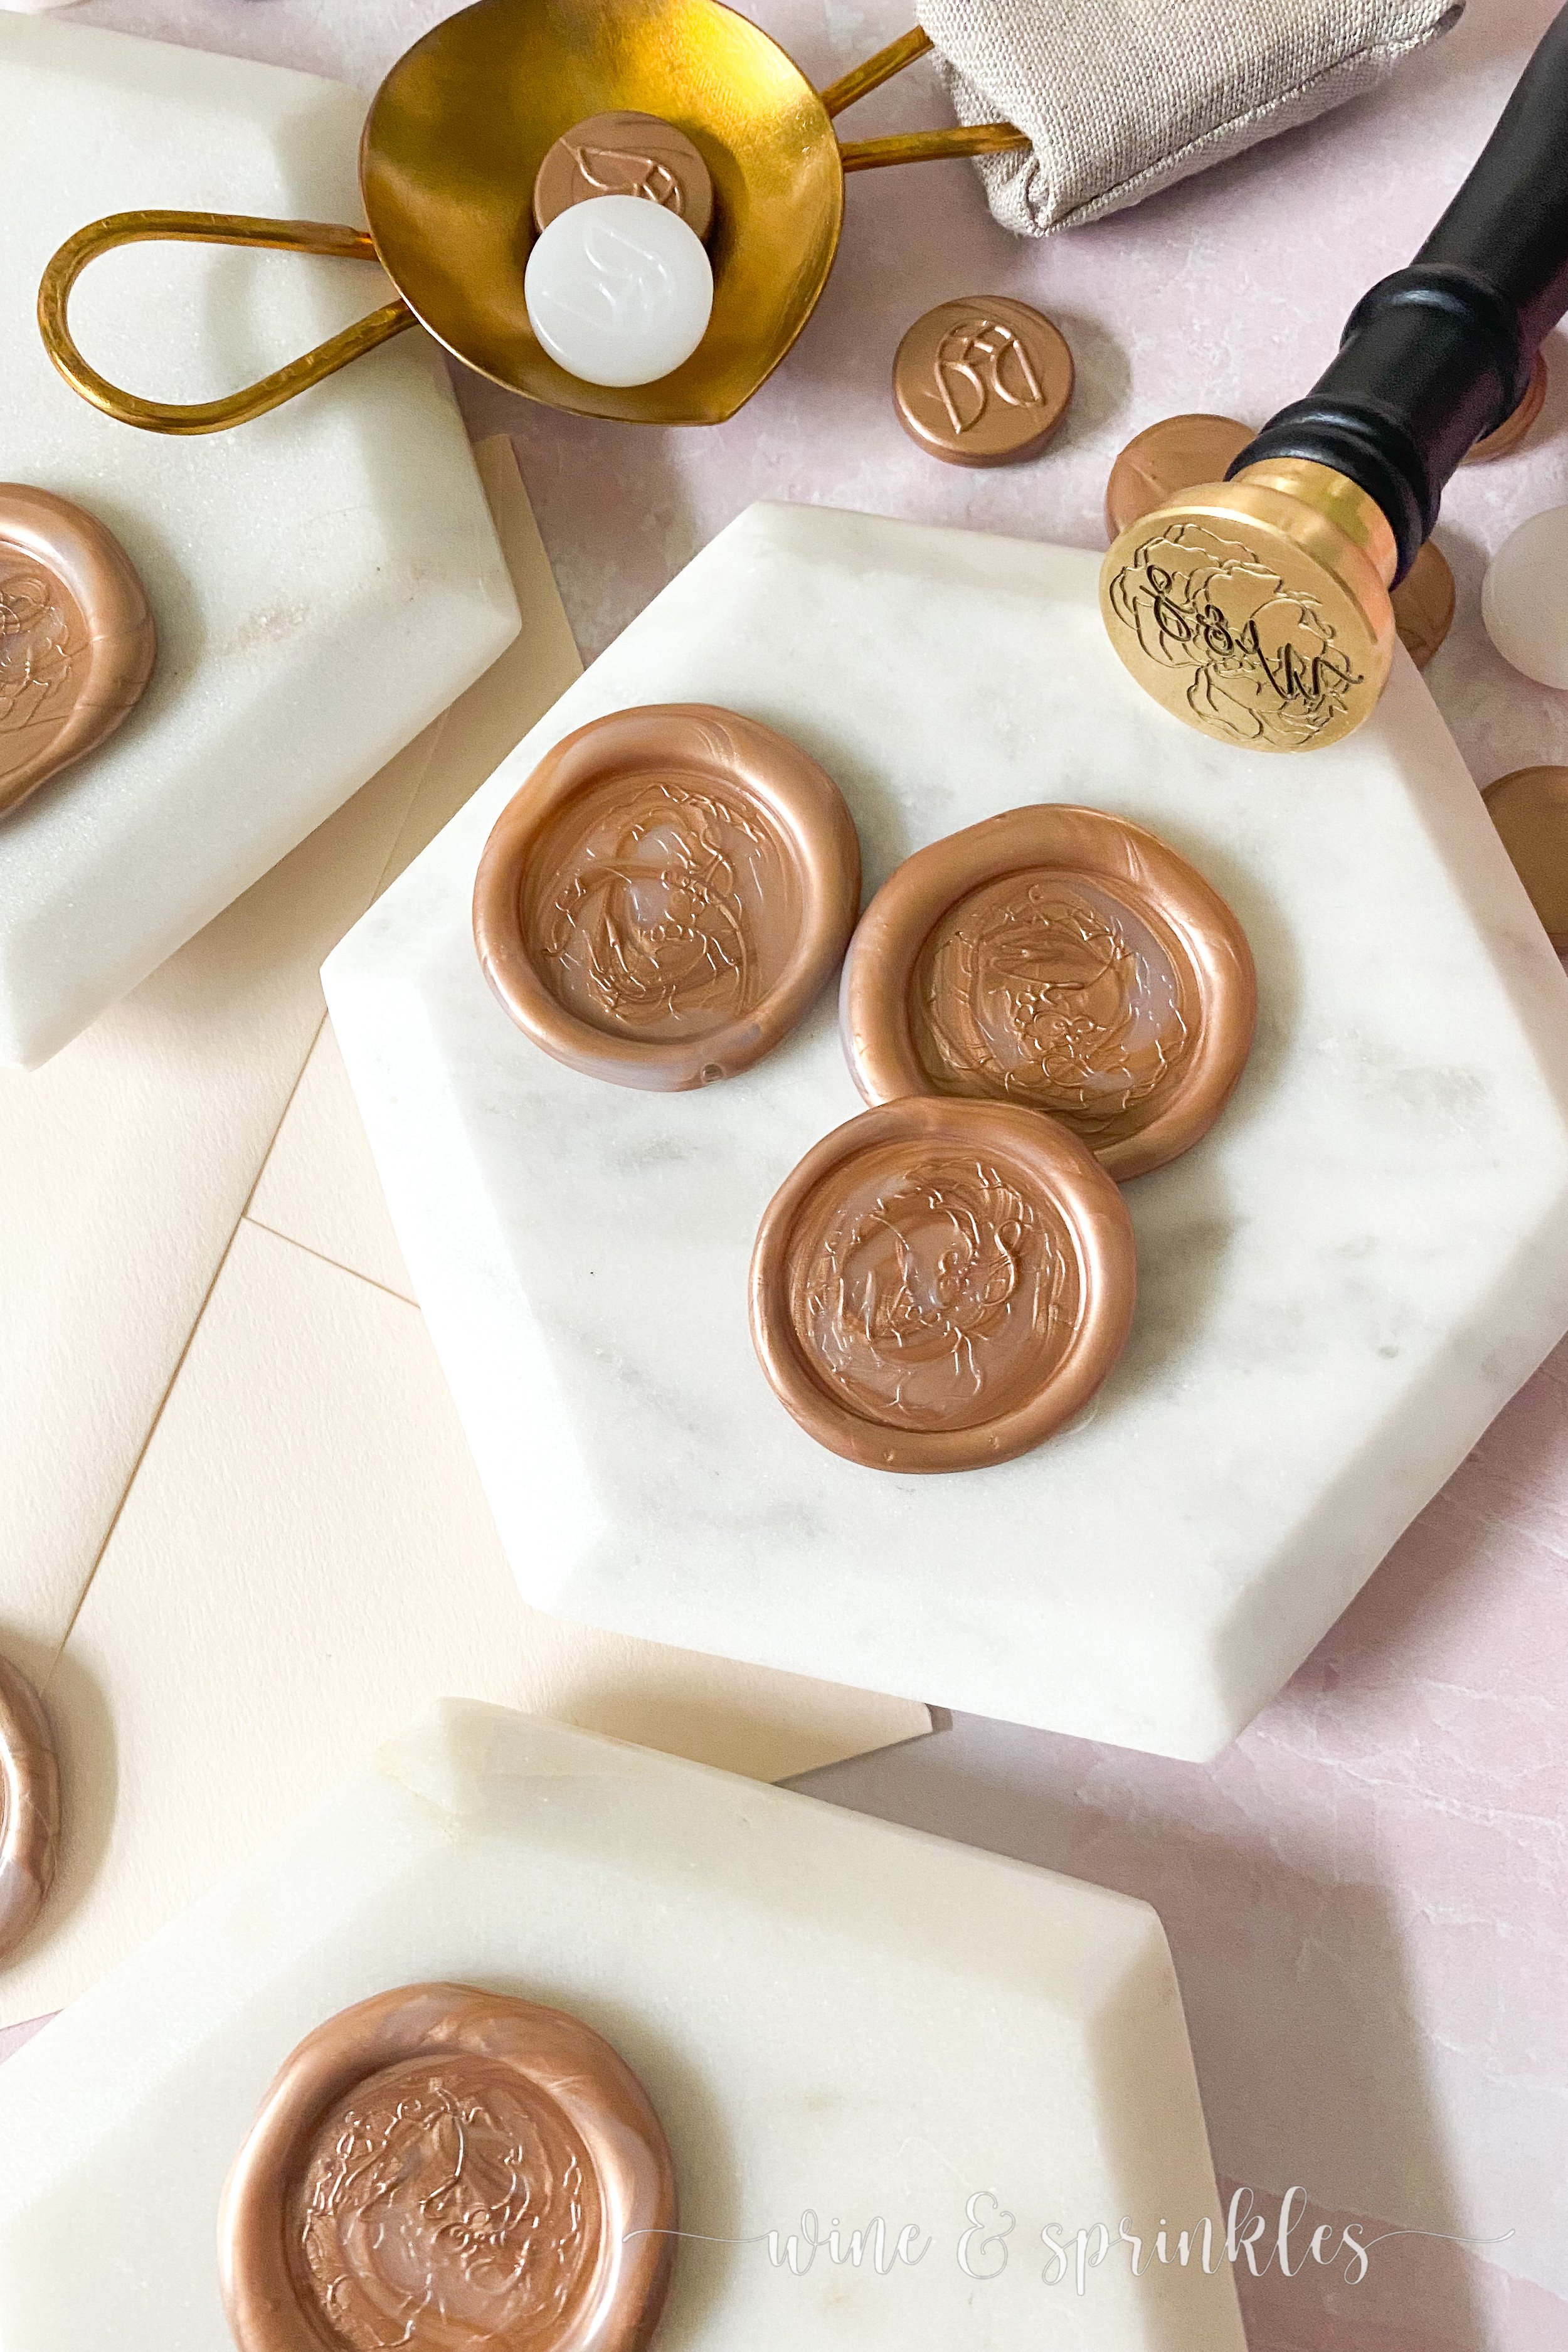 Custom Wax Seals Stamps, The wax seal helps promote your pr…